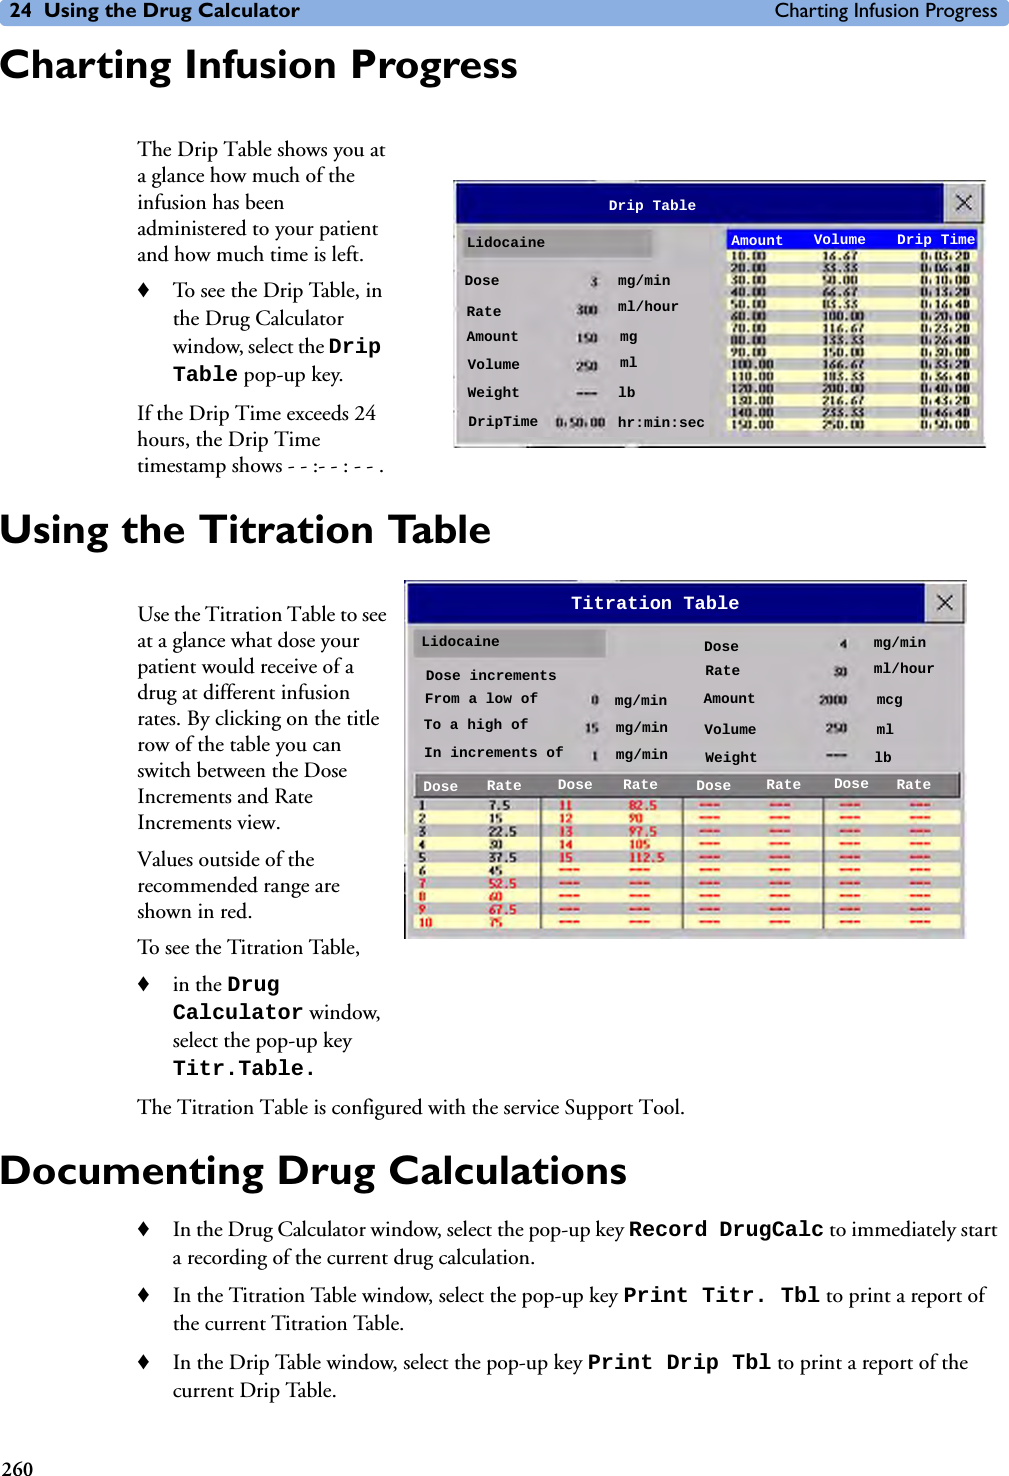 24 Using the Drug Calculator Charting Infusion Progress260Charting Infusion ProgressThe Drip Table shows you at a glance how much of the infusion has been administered to your patient and how much time is left. ♦To see the Drip Table, in the Drug Calculator window, select the Drip Table pop-up key. If the Drip Time exceeds 24 hours, the Drip Time timestamp shows - - :- - : - - .Using the Titration TableUse the Titration Table to see at a glance what dose your patient would receive of a drug at different infusion rates. By clicking on the title row of the table you can switch between the Dose Increments and Rate Increments view.Values outside of the recommended range are shown in red.To see the Titration Table, ♦in the Drug Calculator window, select the pop-up key Titr.Table.The Titration Table is configured with the service Support Tool.Documenting Drug Calculations♦In the Drug Calculator window, select the pop-up key Record DrugCalc to immediately start a recording of the current drug calculation. ♦In the Titration Table window, select the pop-up key Print Titr. Tbl to print a report of the current Titration Table. ♦In the Drip Table window, select the pop-up key Print Drip Tbl to print a report of the current Drip Table. LidocaineDrip TableAmount Volume Drip TimeDose mg/minRate ml/hourAmount mgVolume mlWeight lbDripTime hr:min:secLidocaineTitration TableRateDoseIn increments ofmg/minRatemg/minAmountFrom a low of mcgVolumeTo a high of mlWeightDose incrementslbDose Dose Dose DoseRate Rate Ratemg/minml/hourmg/min